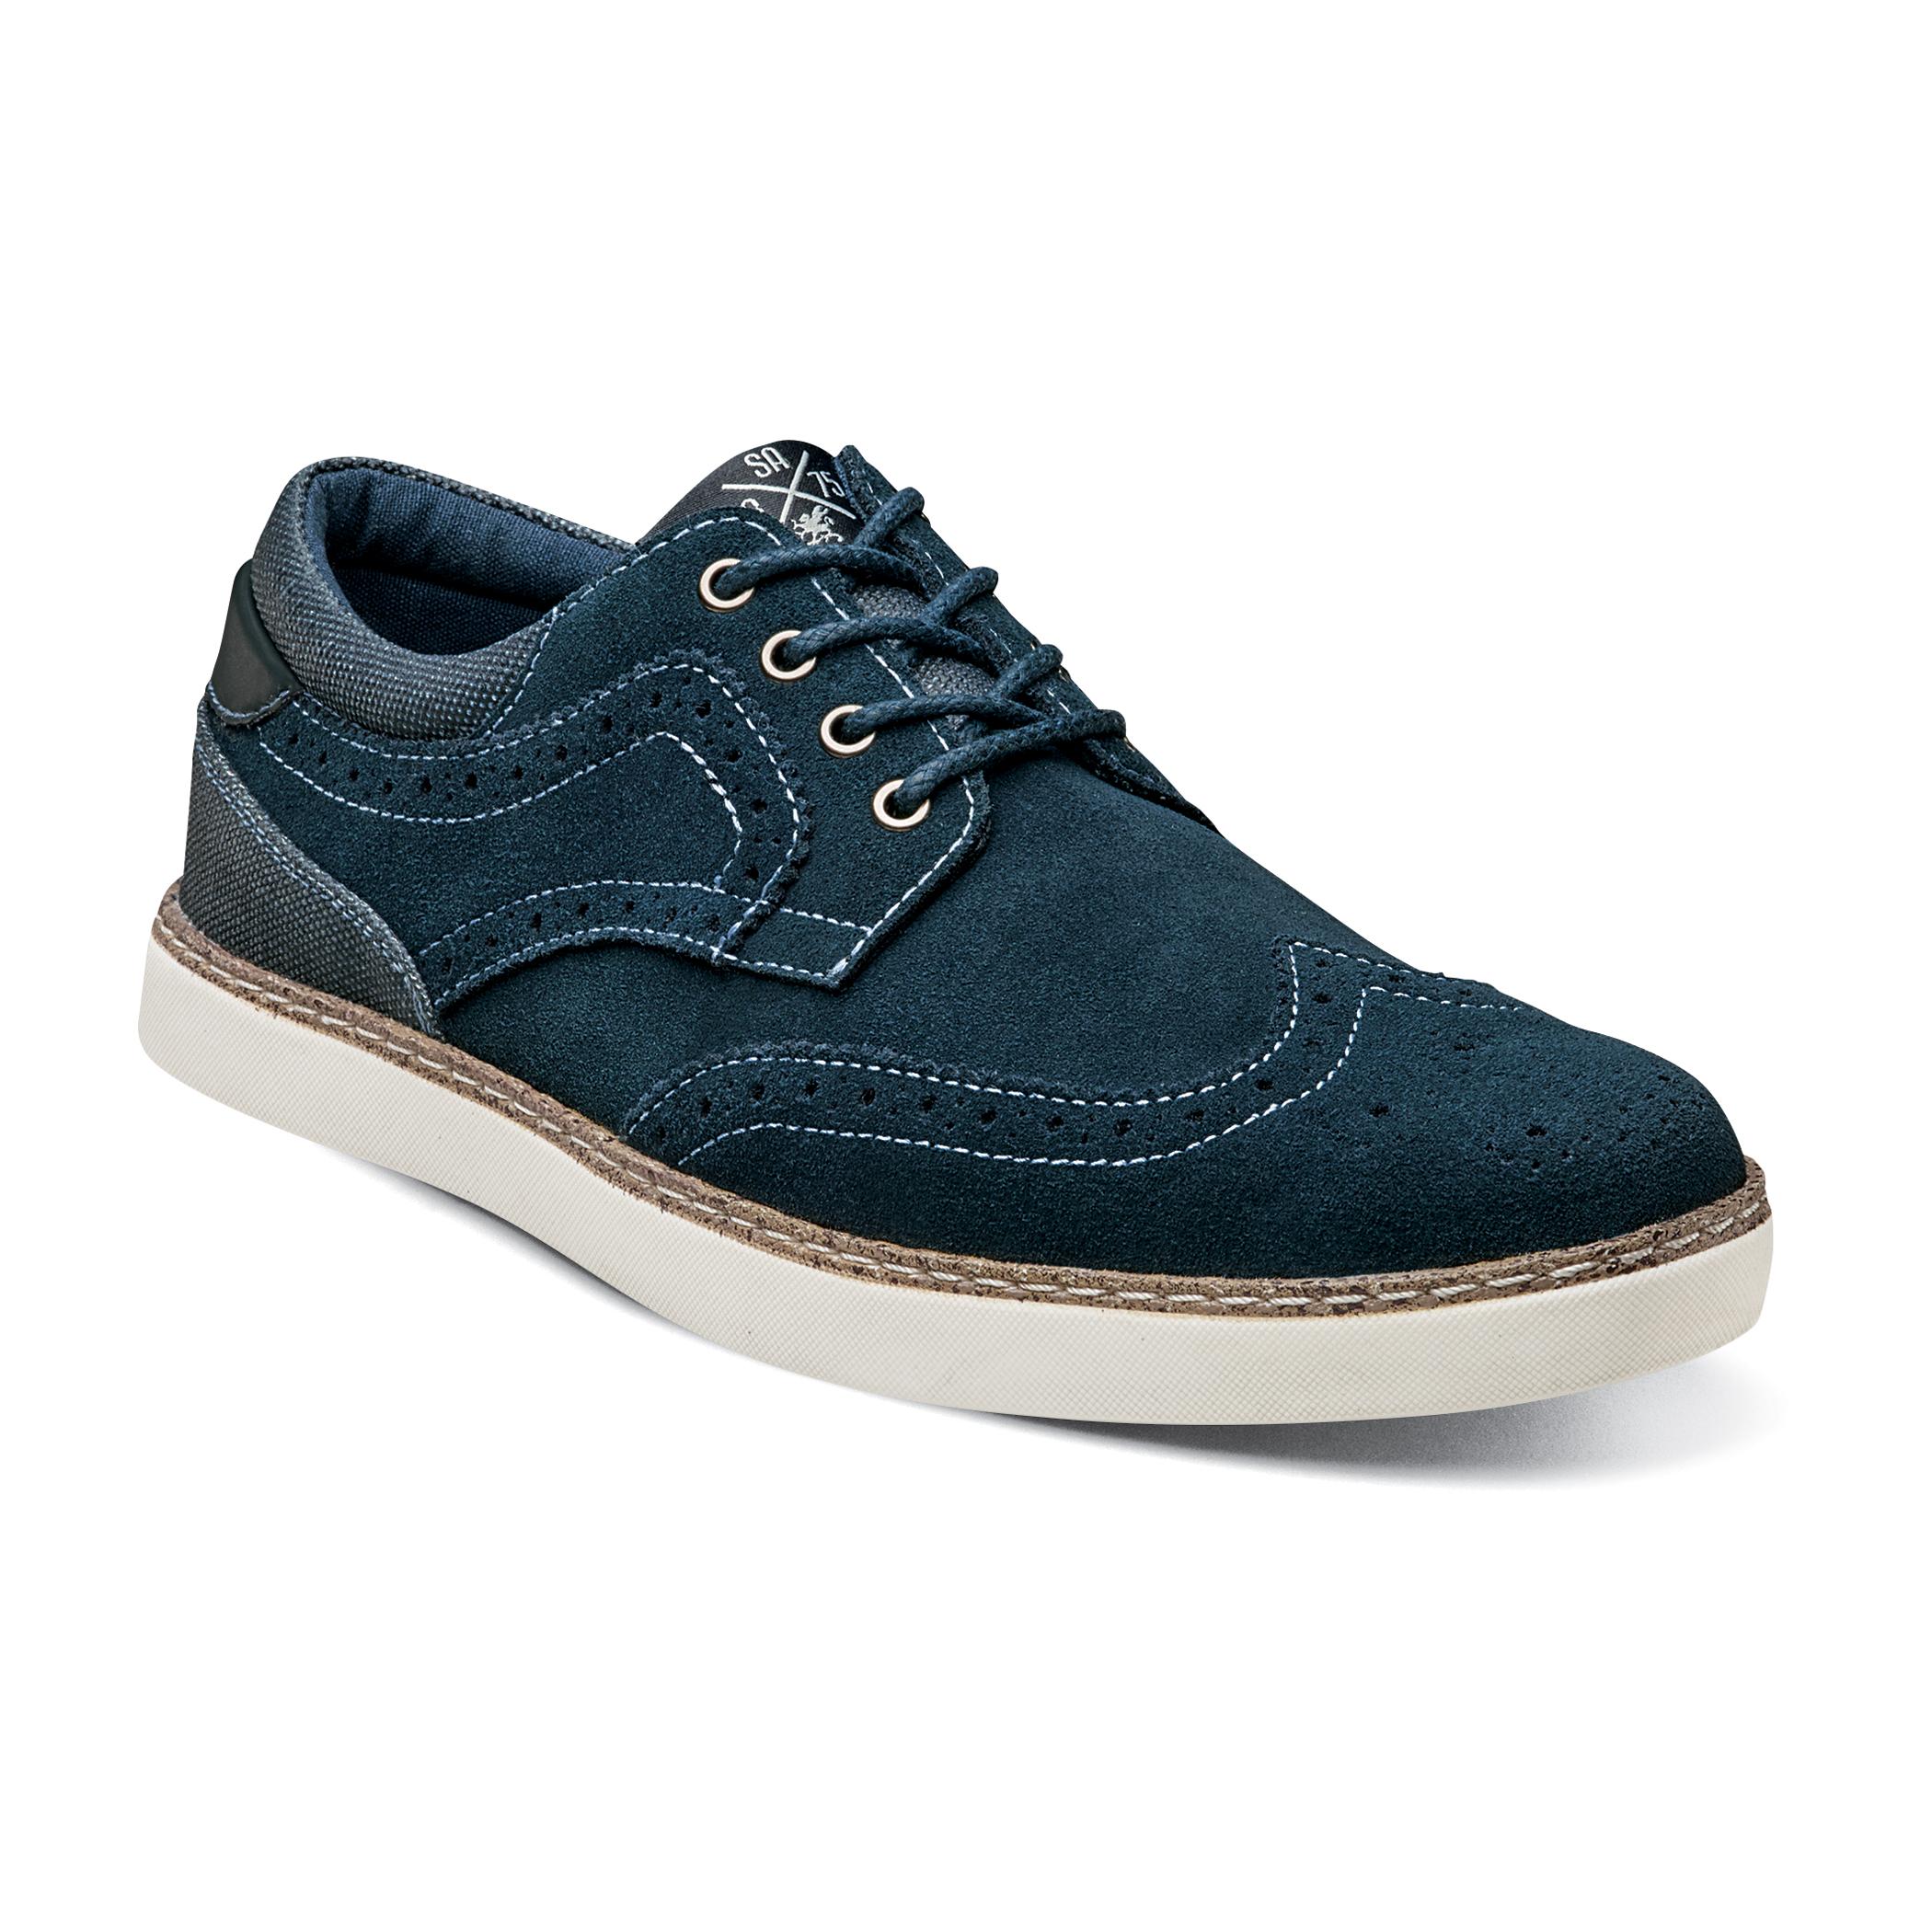 Stacy Adams Taz Navy Suede Wingtip Shoes 53416 - $74.90 :: Upscale ...